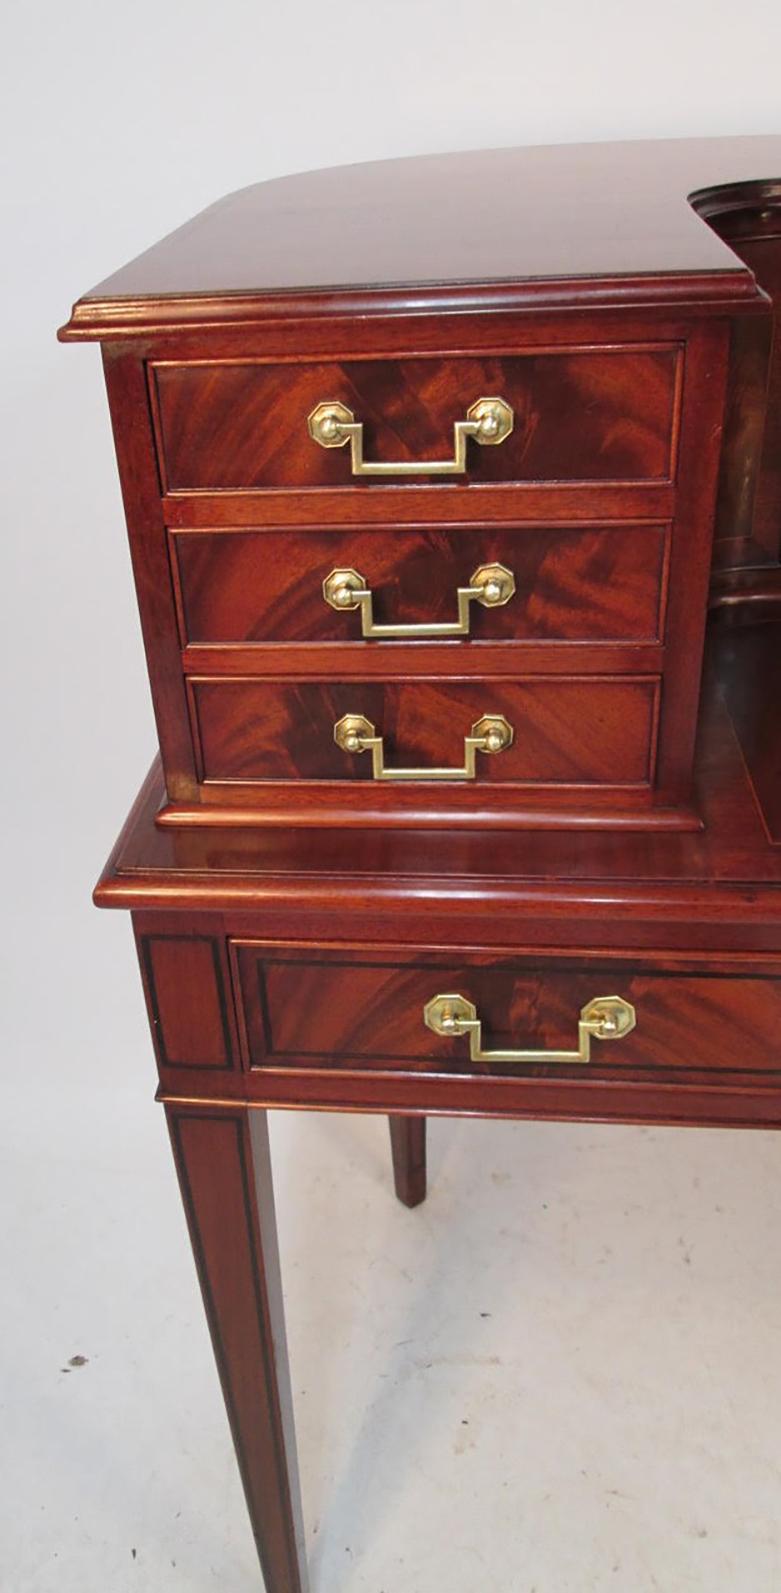 A fine mahogany Carlton House desk with 12 fitted drawers in the upper case over three fitted frieze drawers below the writing surface. Each drawer has crotched mahogany veneer fronts, as well as solid brass drawer pulls, and the desk is supported